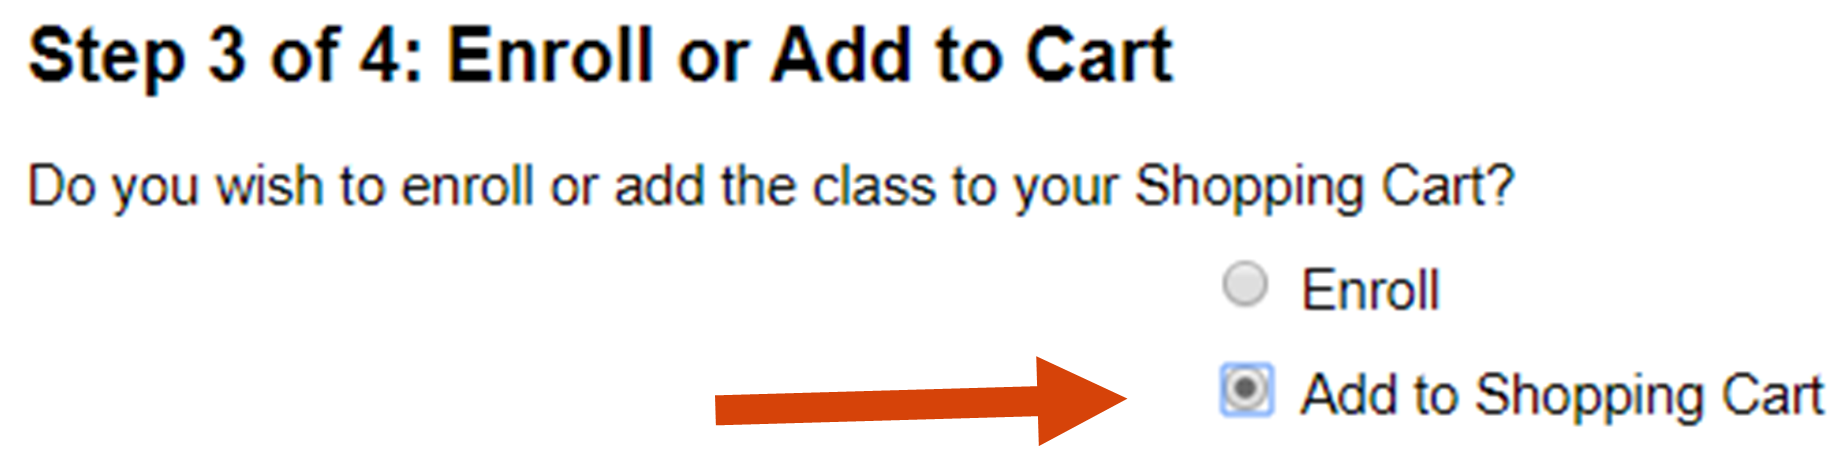 Arrow pointing to "Add to Shopping Cart" selection